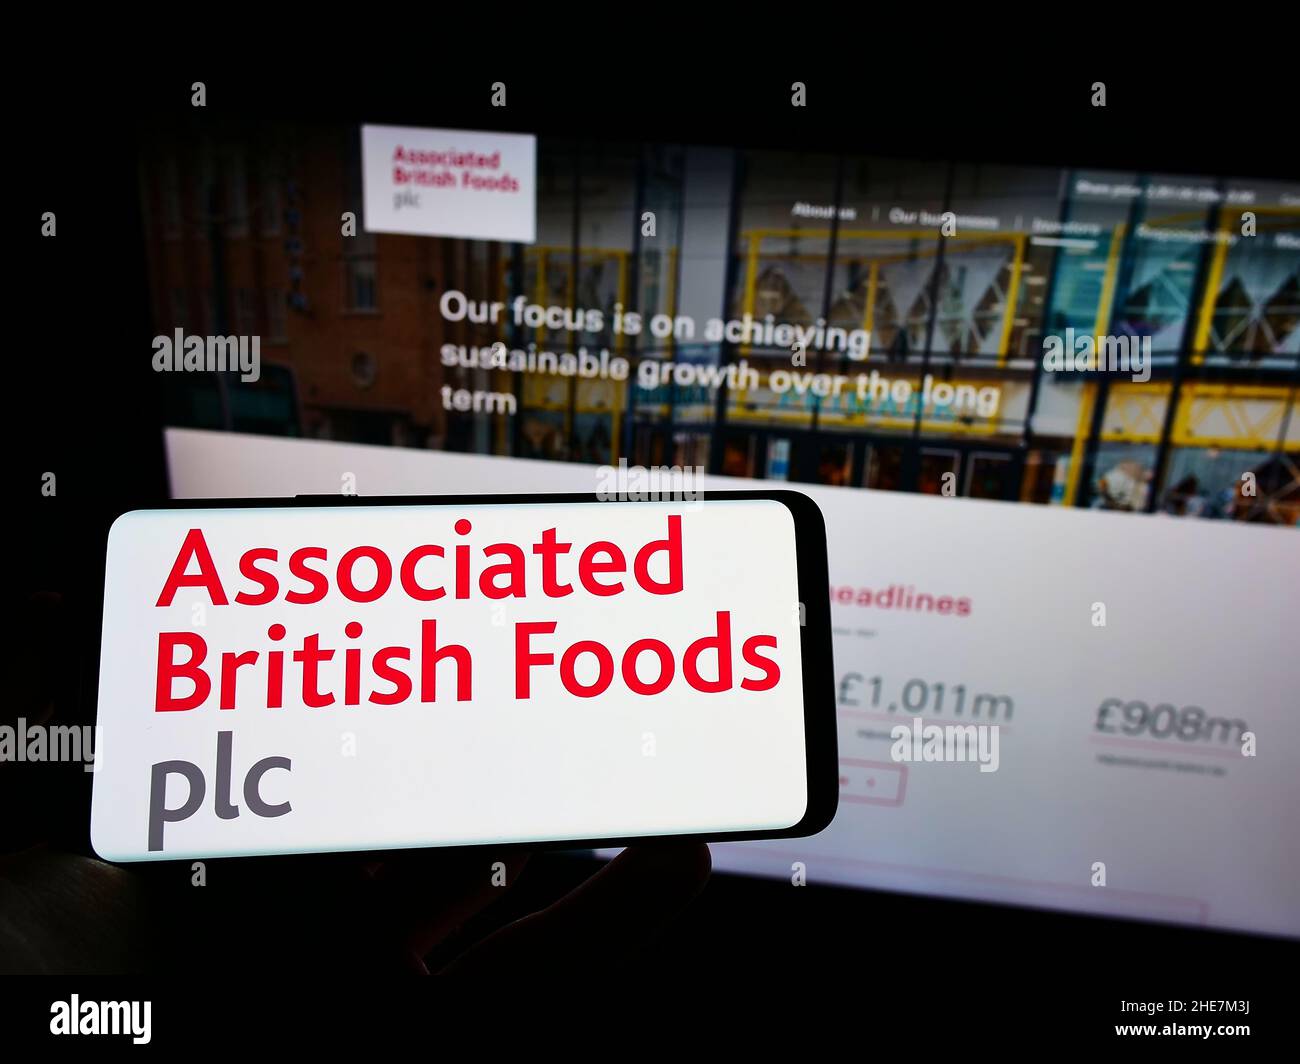 Person holding cellphone with logo of company Associated British Foods plc (ABF) on screen in front of business web page. Focus on phone display. Stock Photo